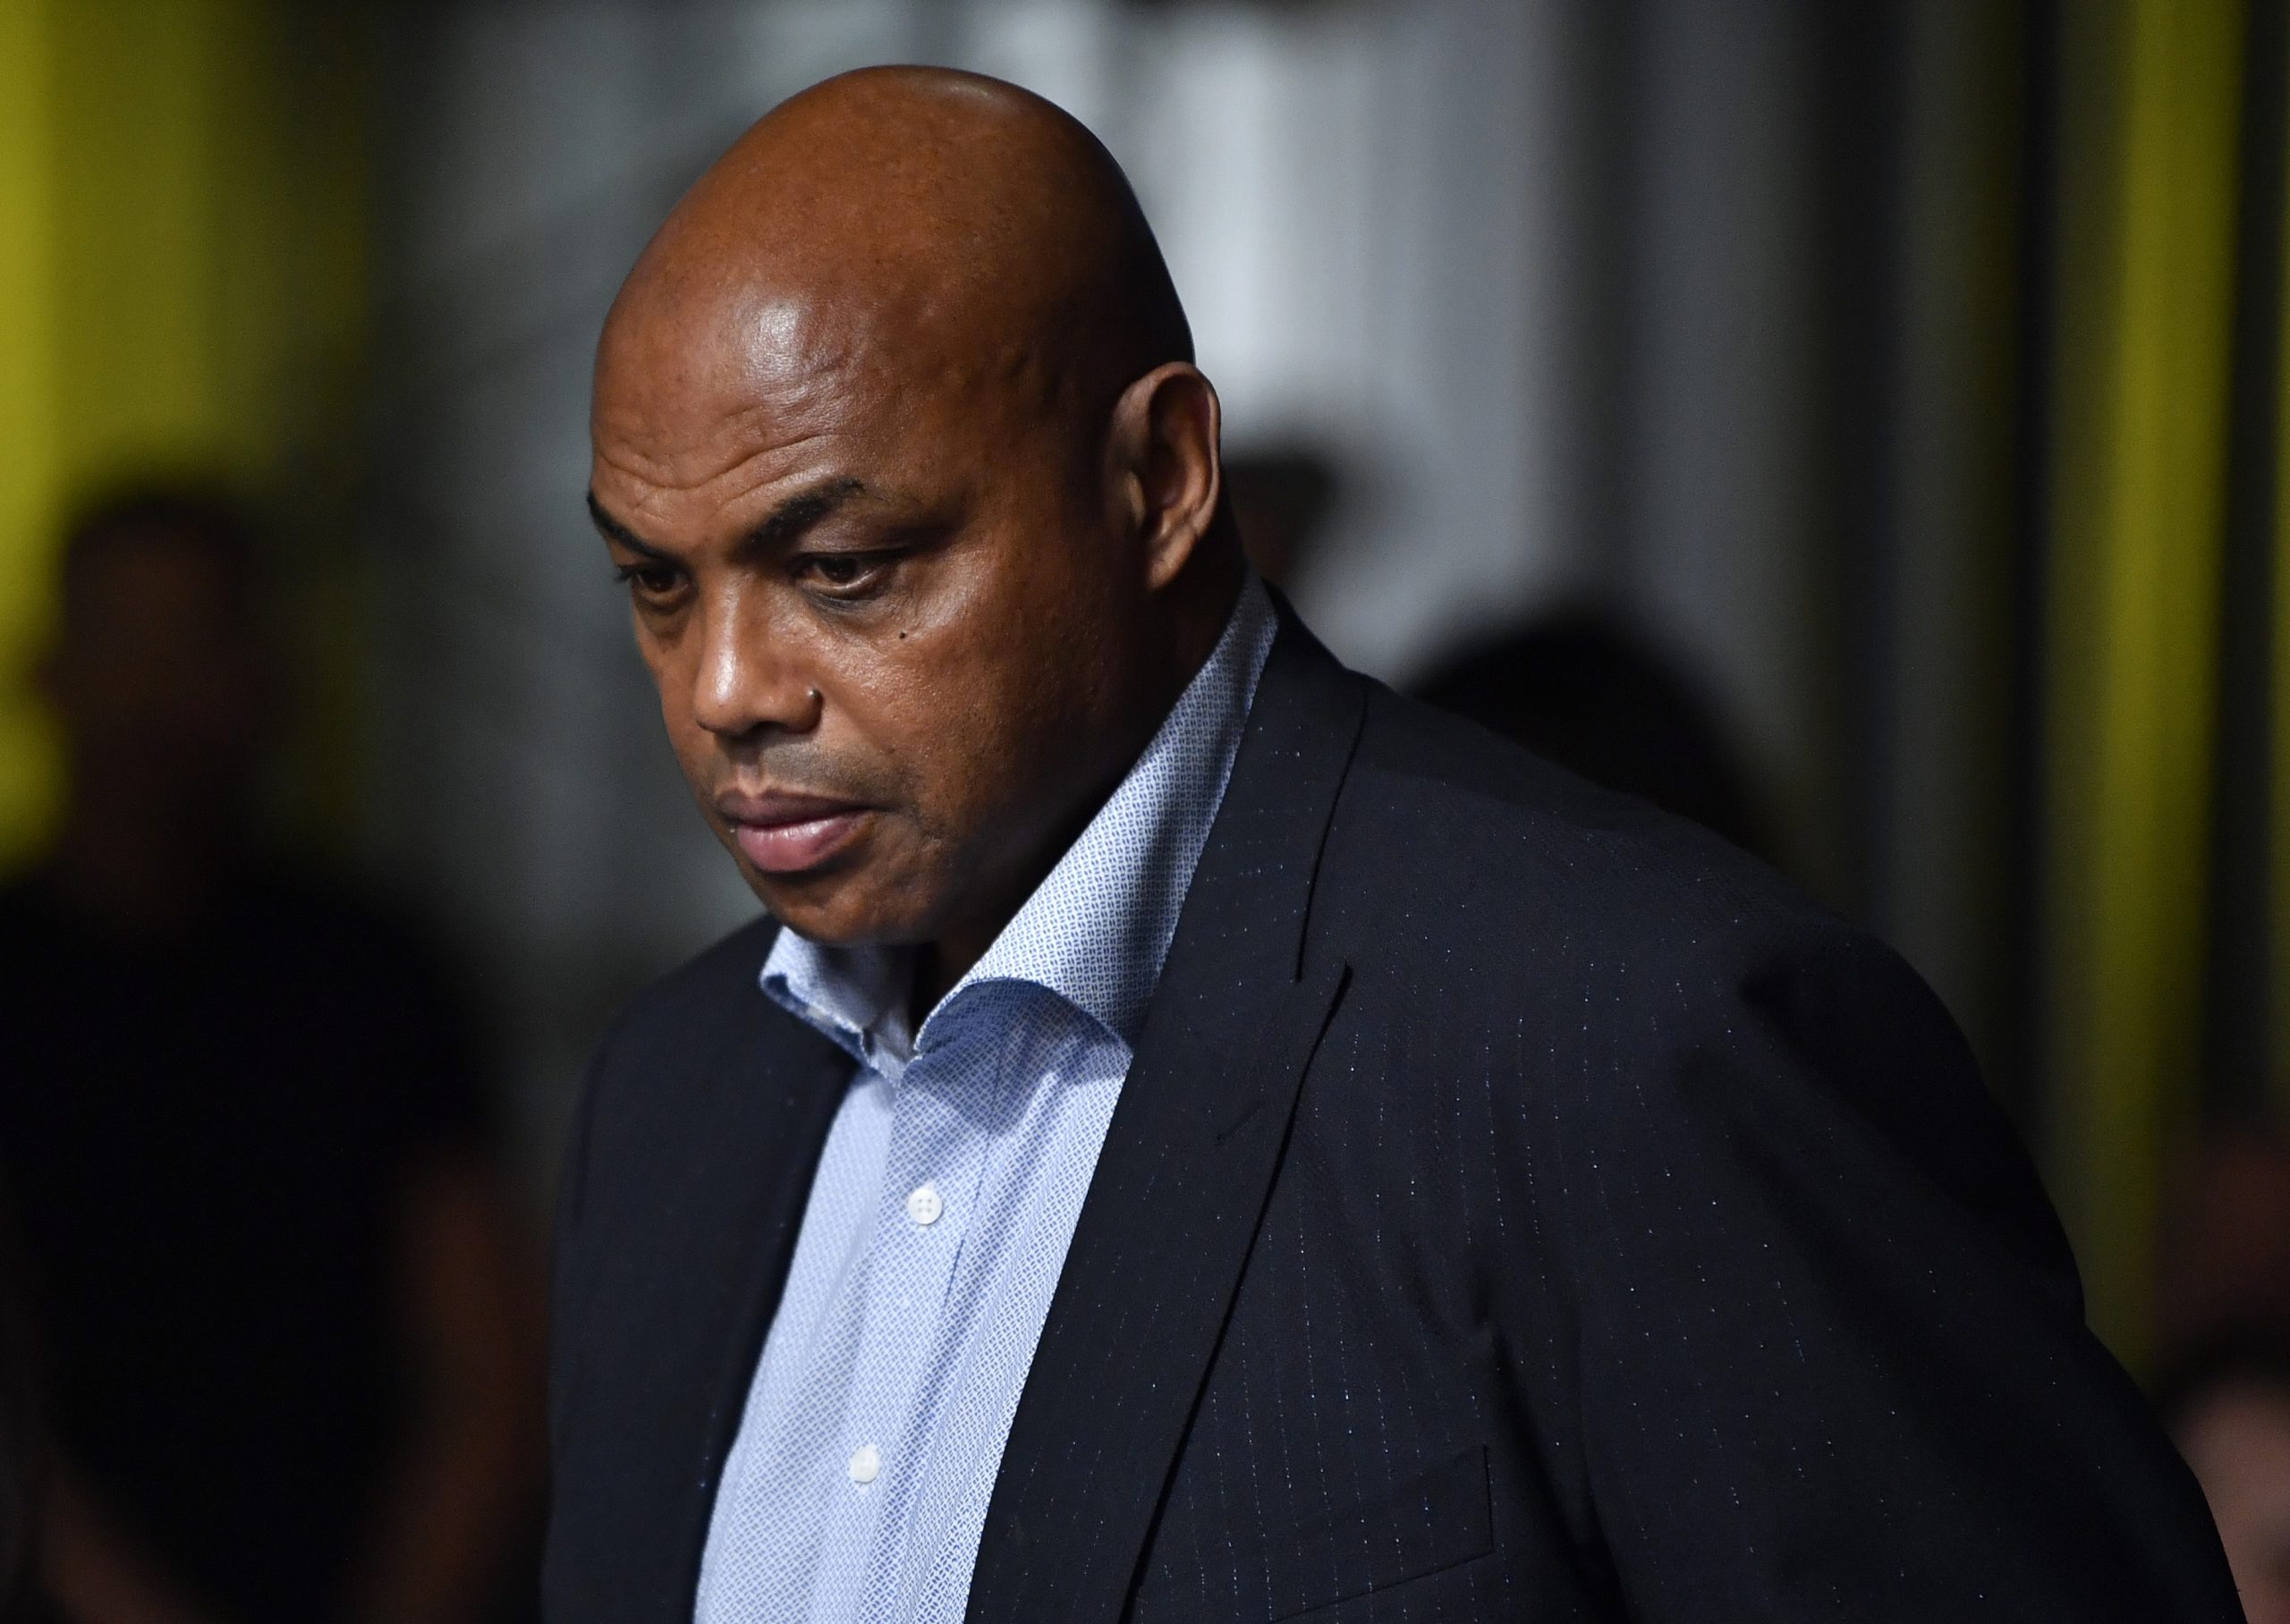 Charles Barkley is seen in attendance during the UFC Fight Night event.